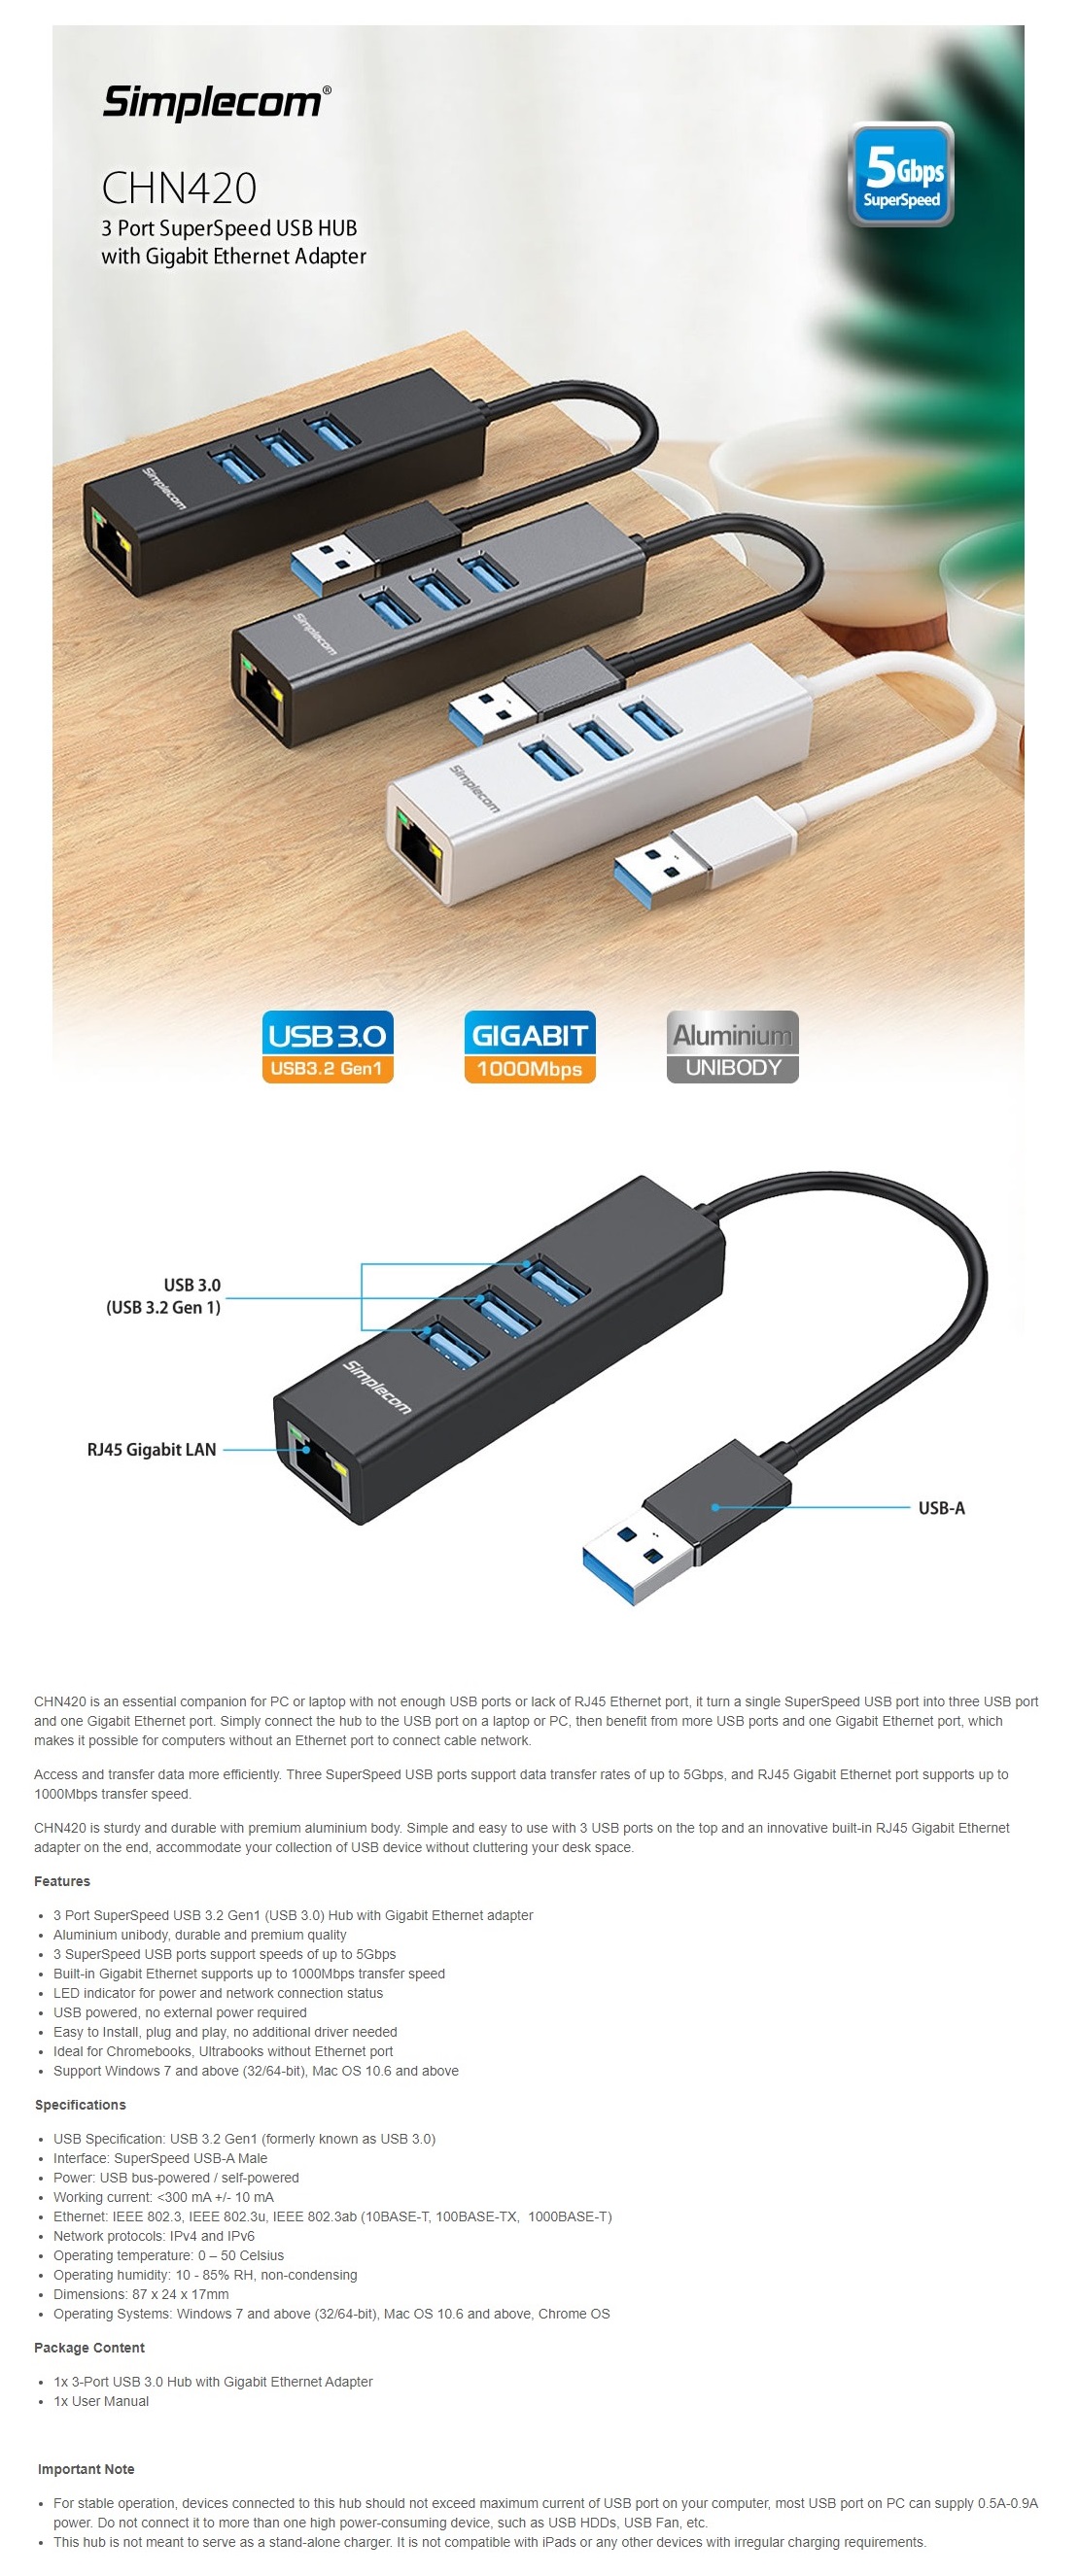 A large marketing image providing additional information about the product Simplecom CHN420 USB-A to 3 Port USB-A HUB w/ Gigabit Ethernet Adapter - Black - Additional alt info not provided